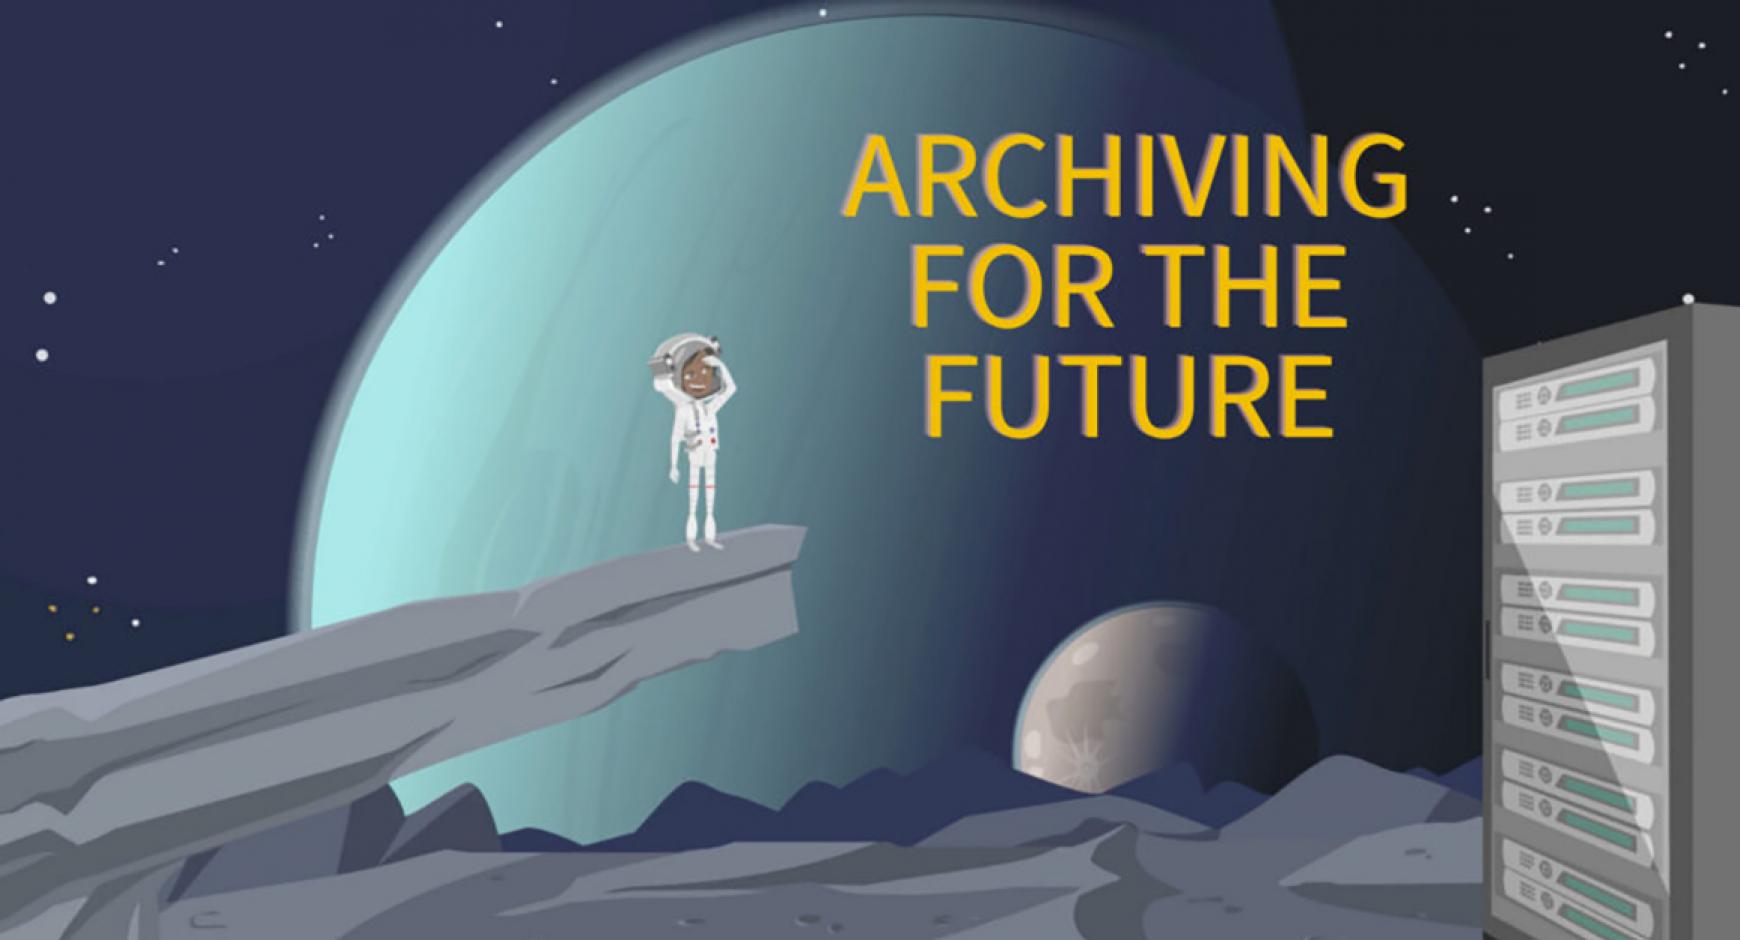 cartoon illustration of astronaut on lunar landscape looking at server; "Archiving for the Future" is printed in the top right corner of the image